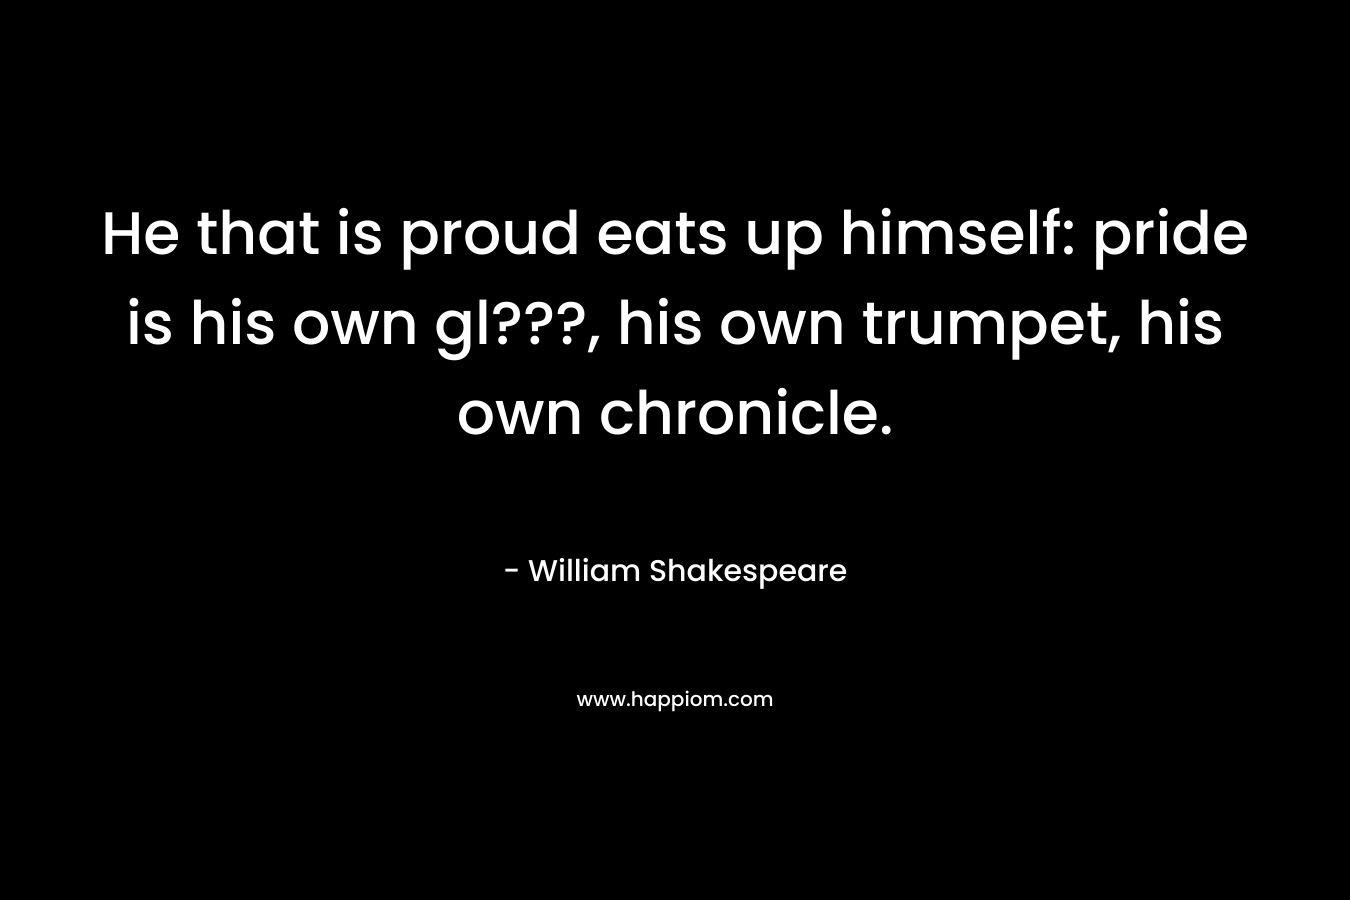 He that is proud eats up himself: pride is his own gl???, his own trumpet, his own chronicle.